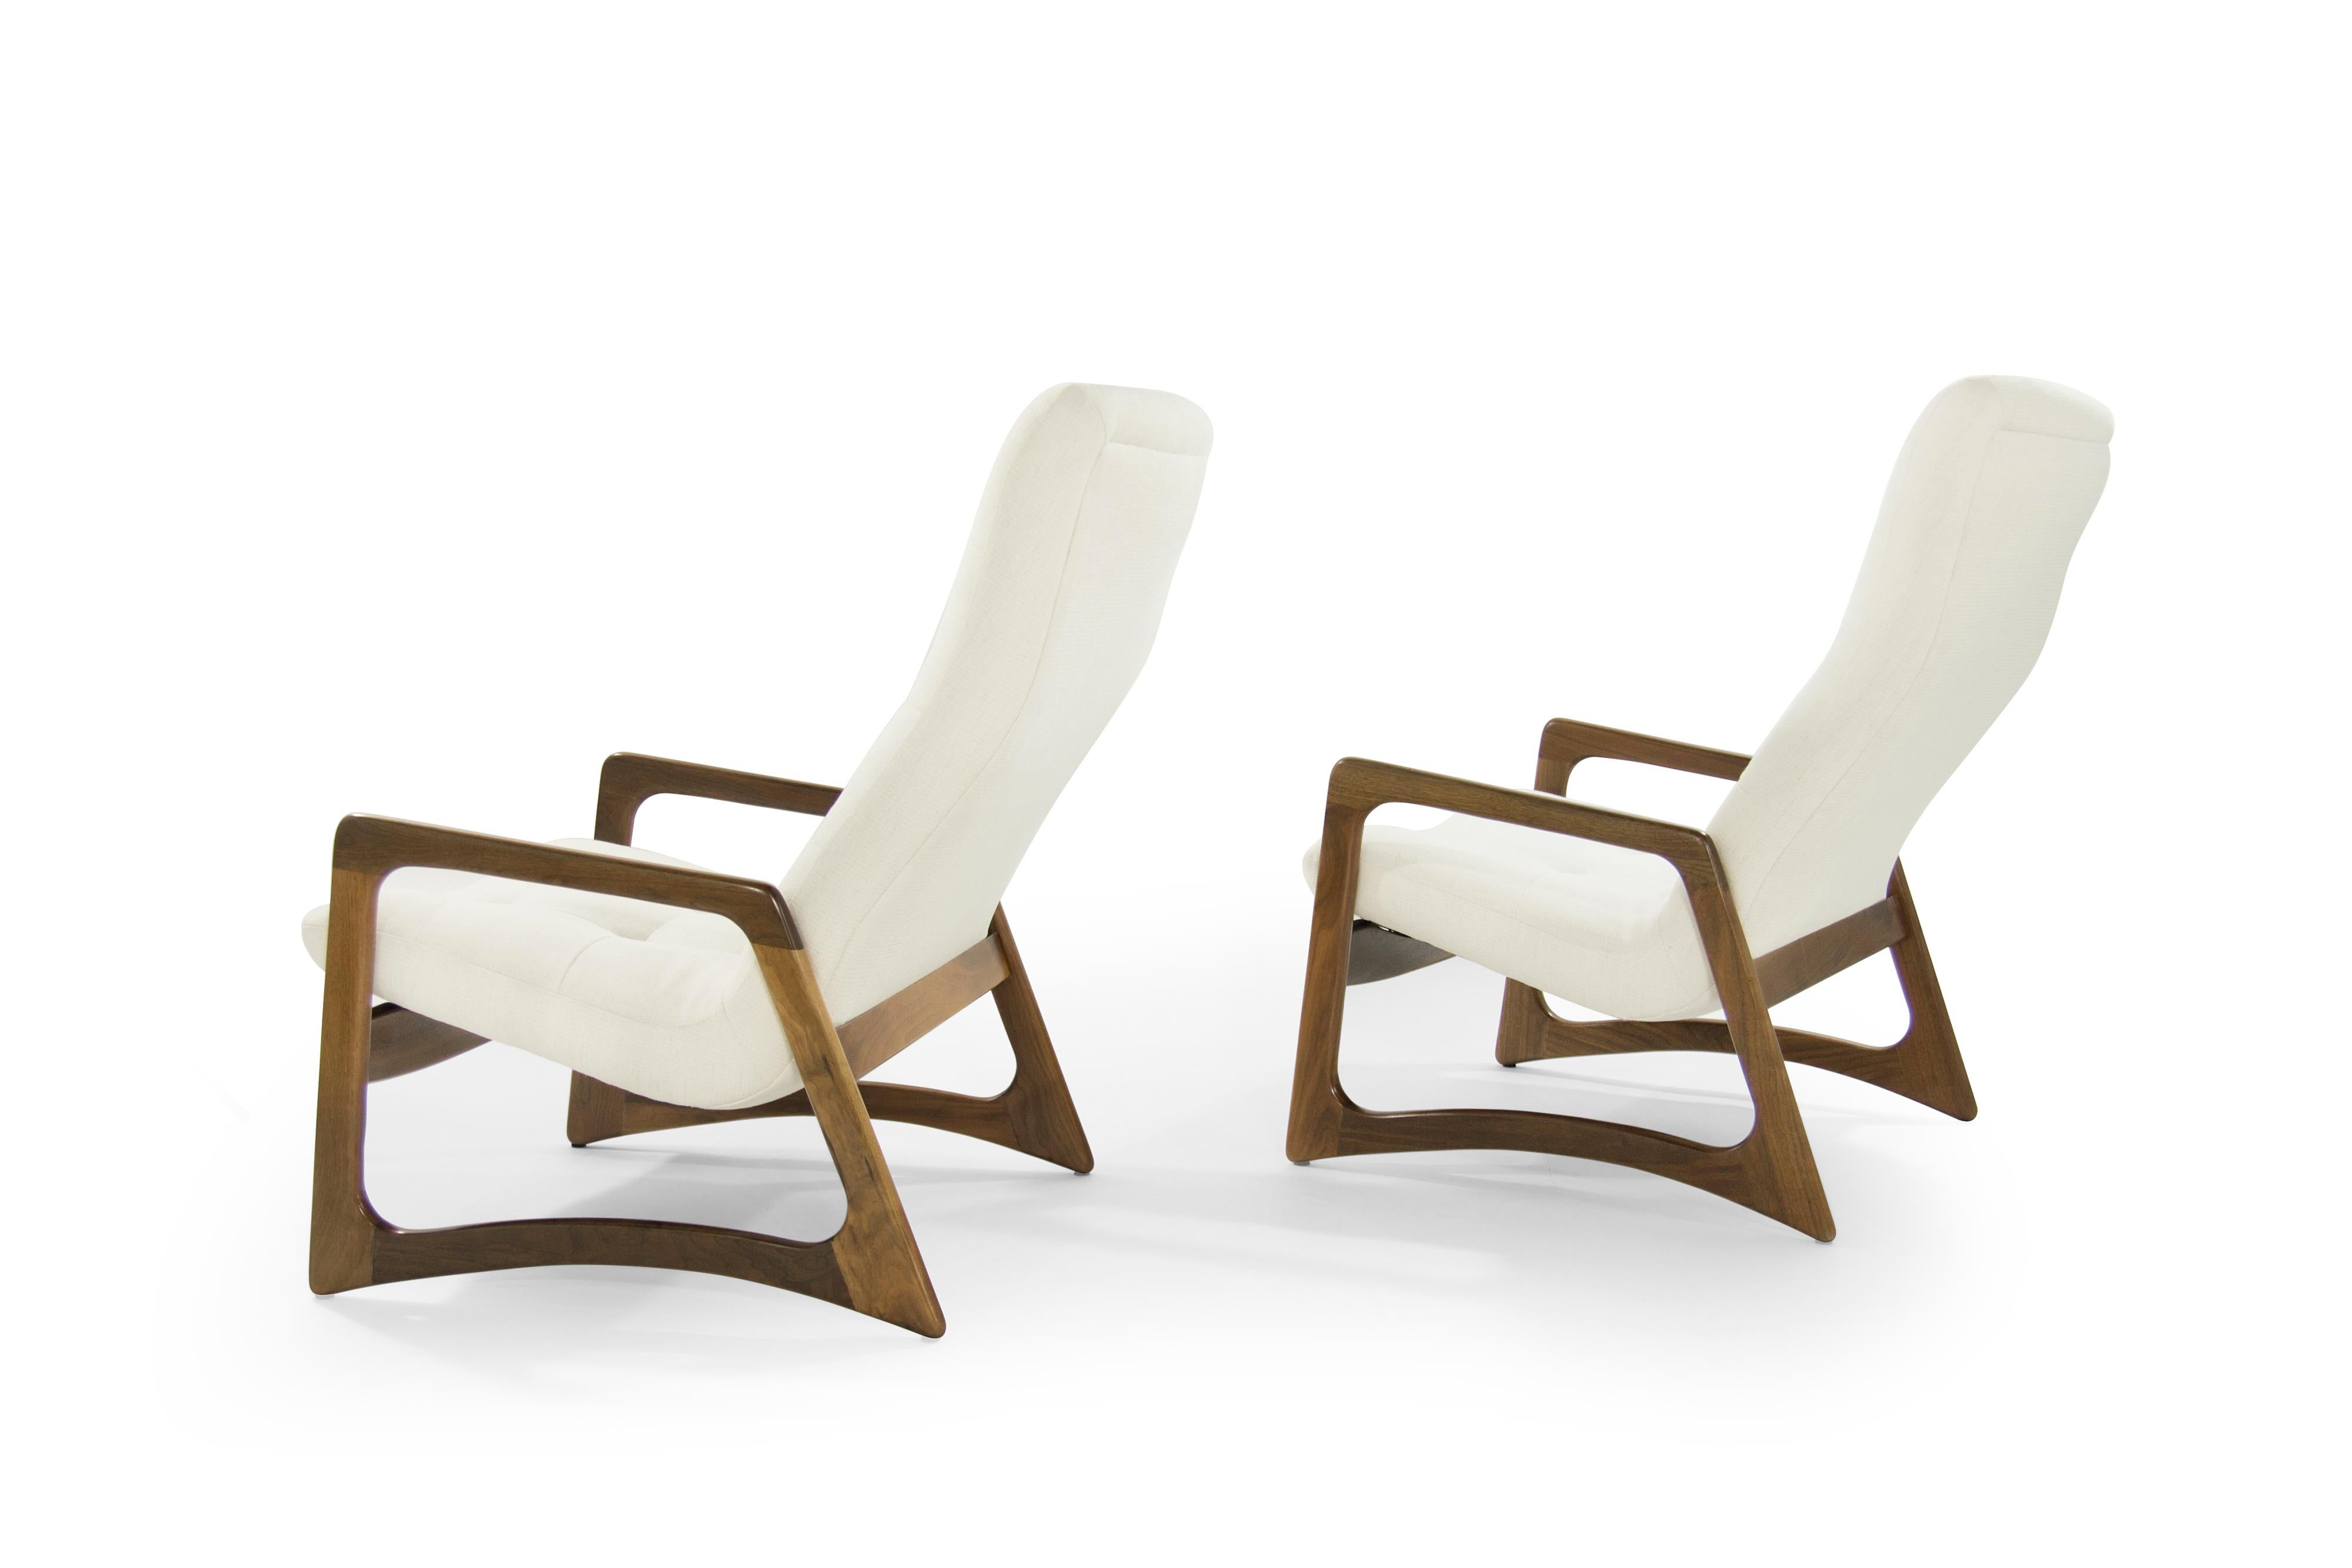 20th Century Sculptural Walnut Lounge Chairs by Adrian Pearsall for Craft Associates